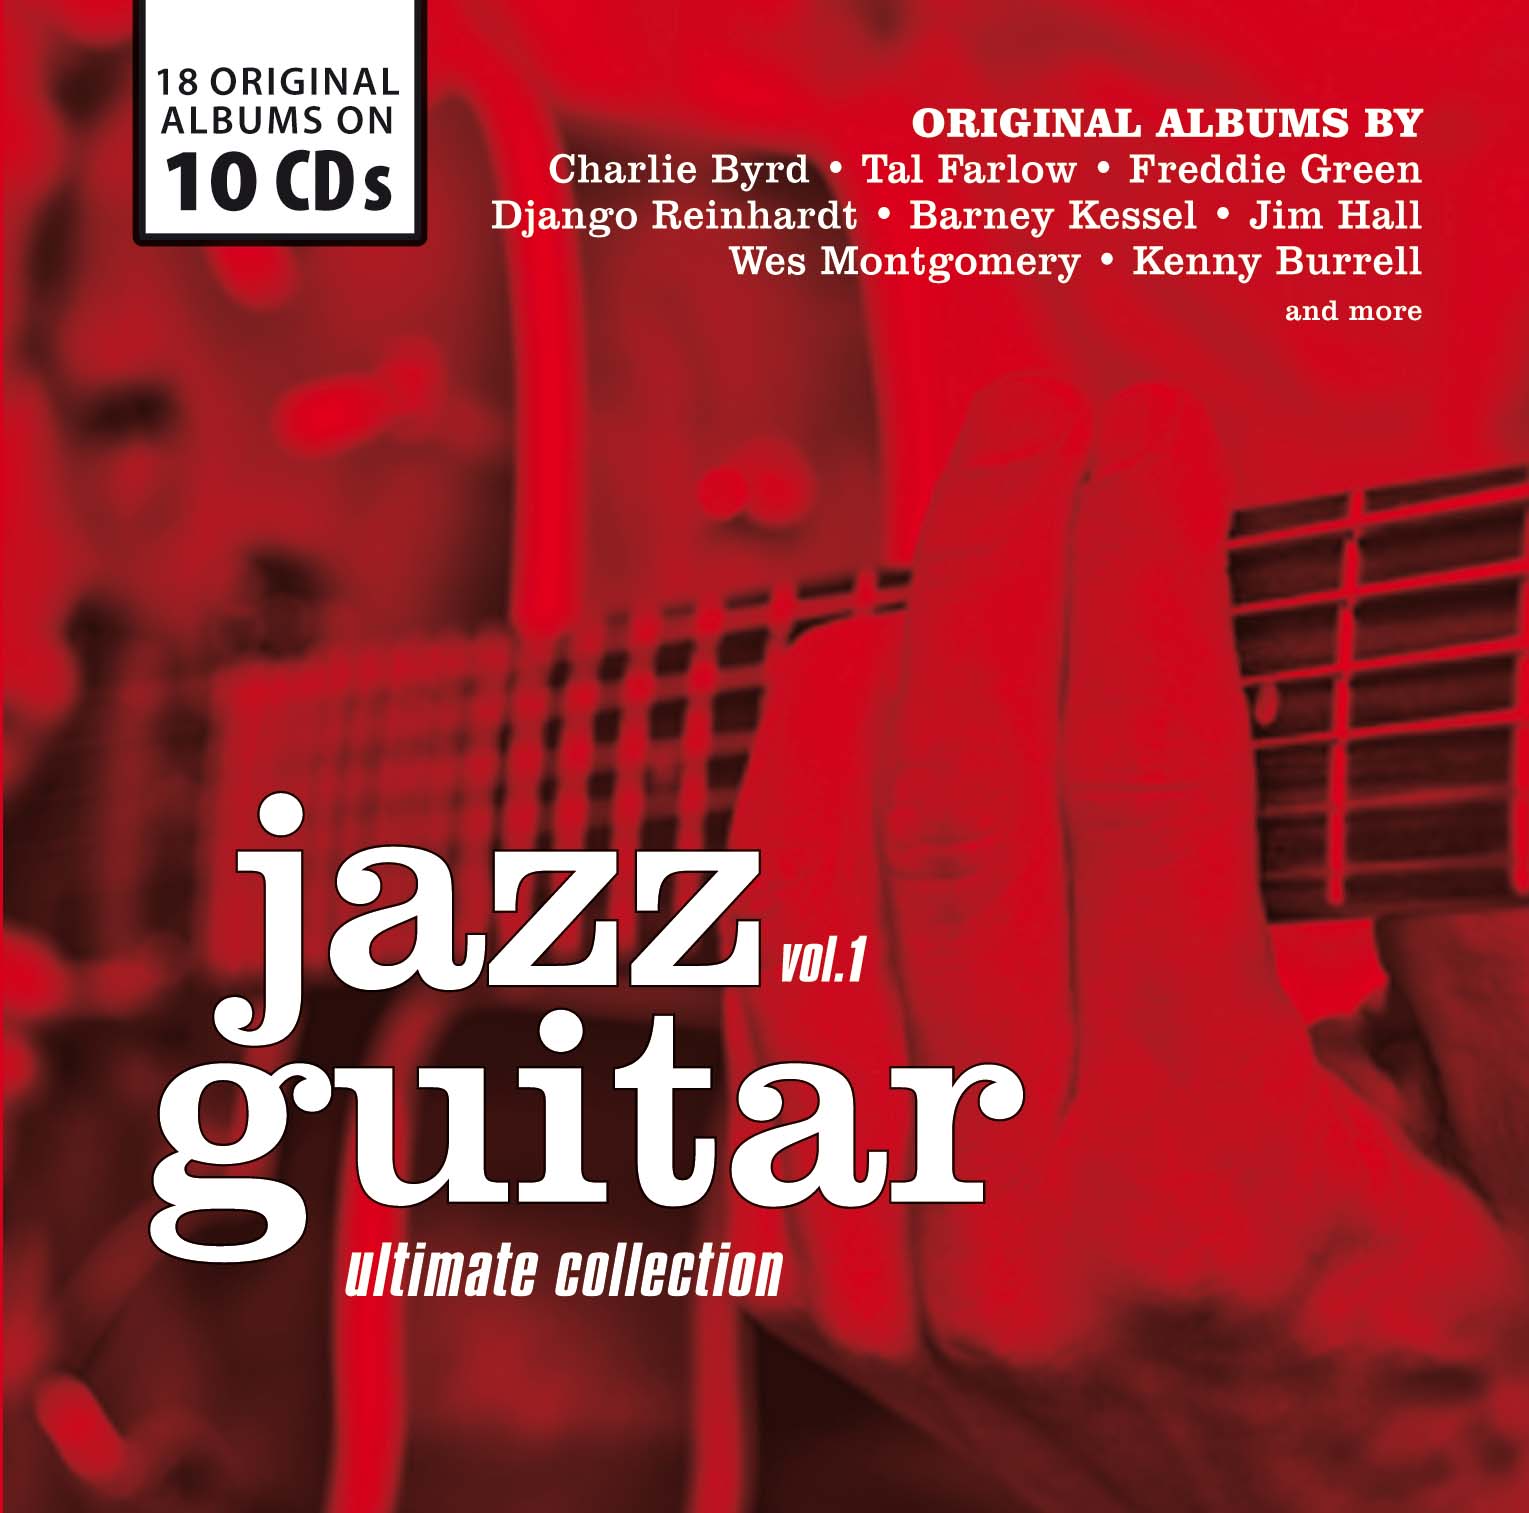 JAZZ GUITAR ULTIMATE COLLECTION VOL 1